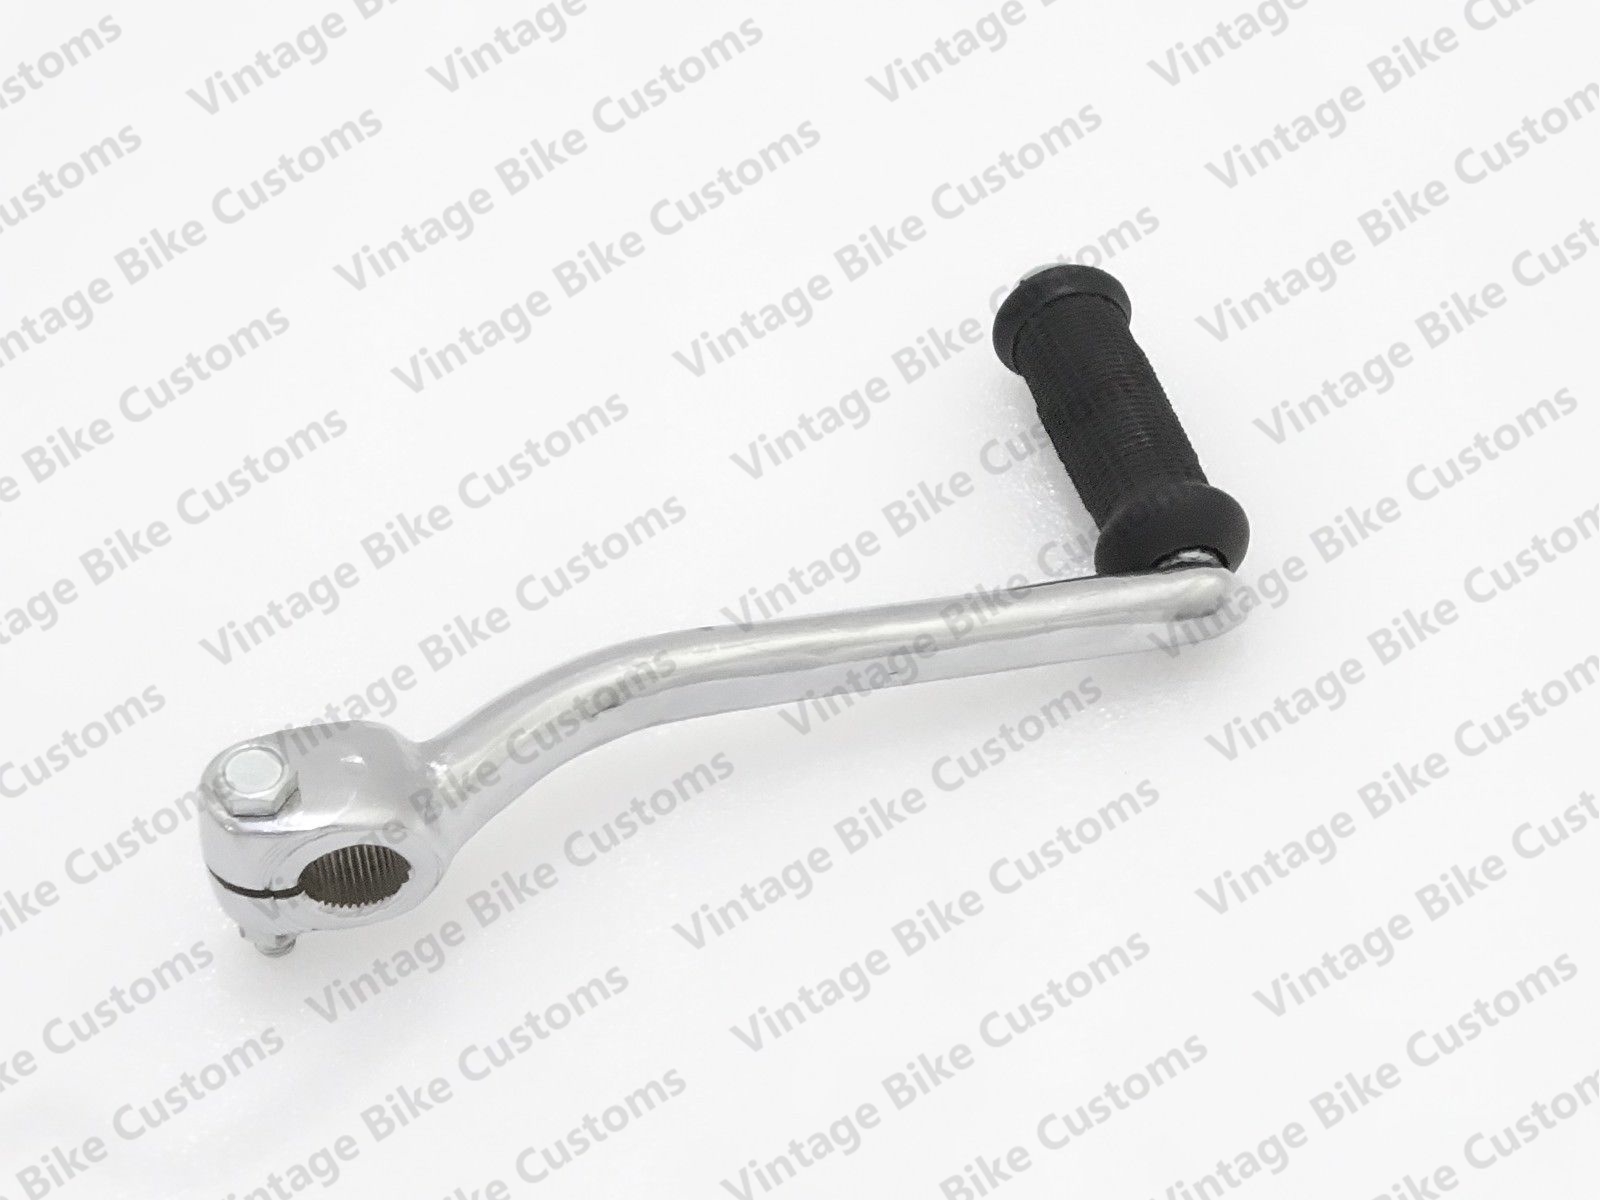 CODE 1638 NEW ROYAL ENFIELD CHROME 5 SPEED KICK STARTER LEVER ASSEMBLY 